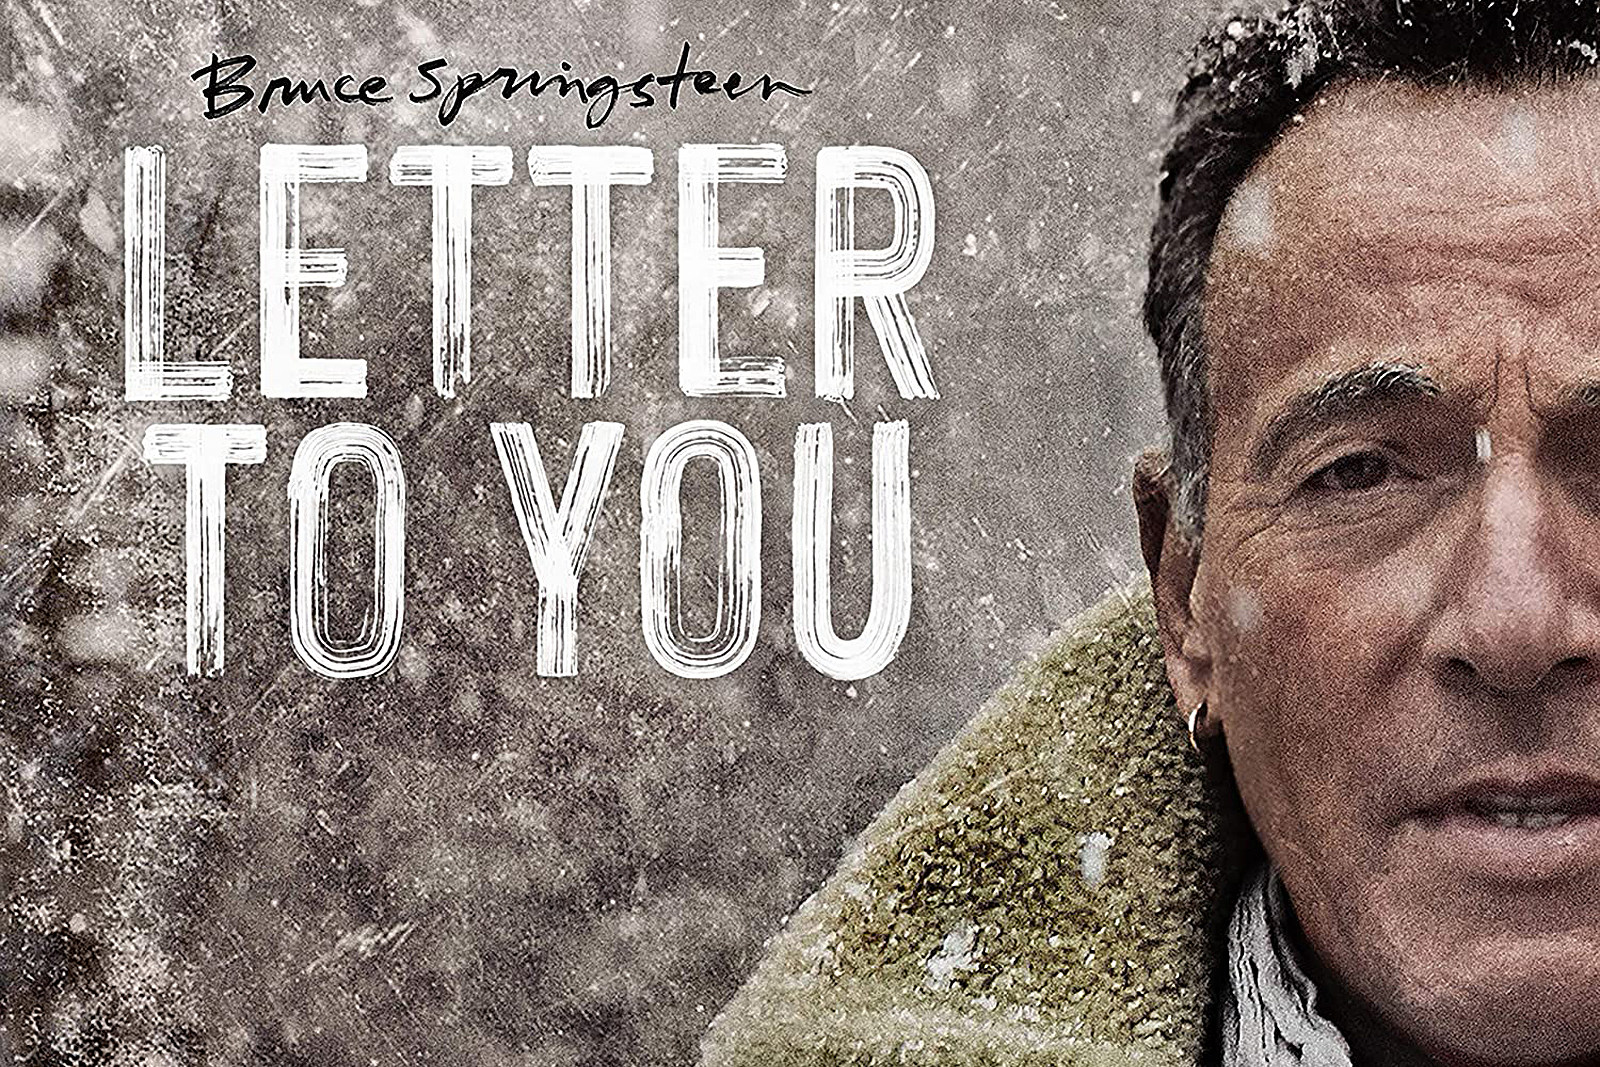 Bruce Springsteen - Letter To You